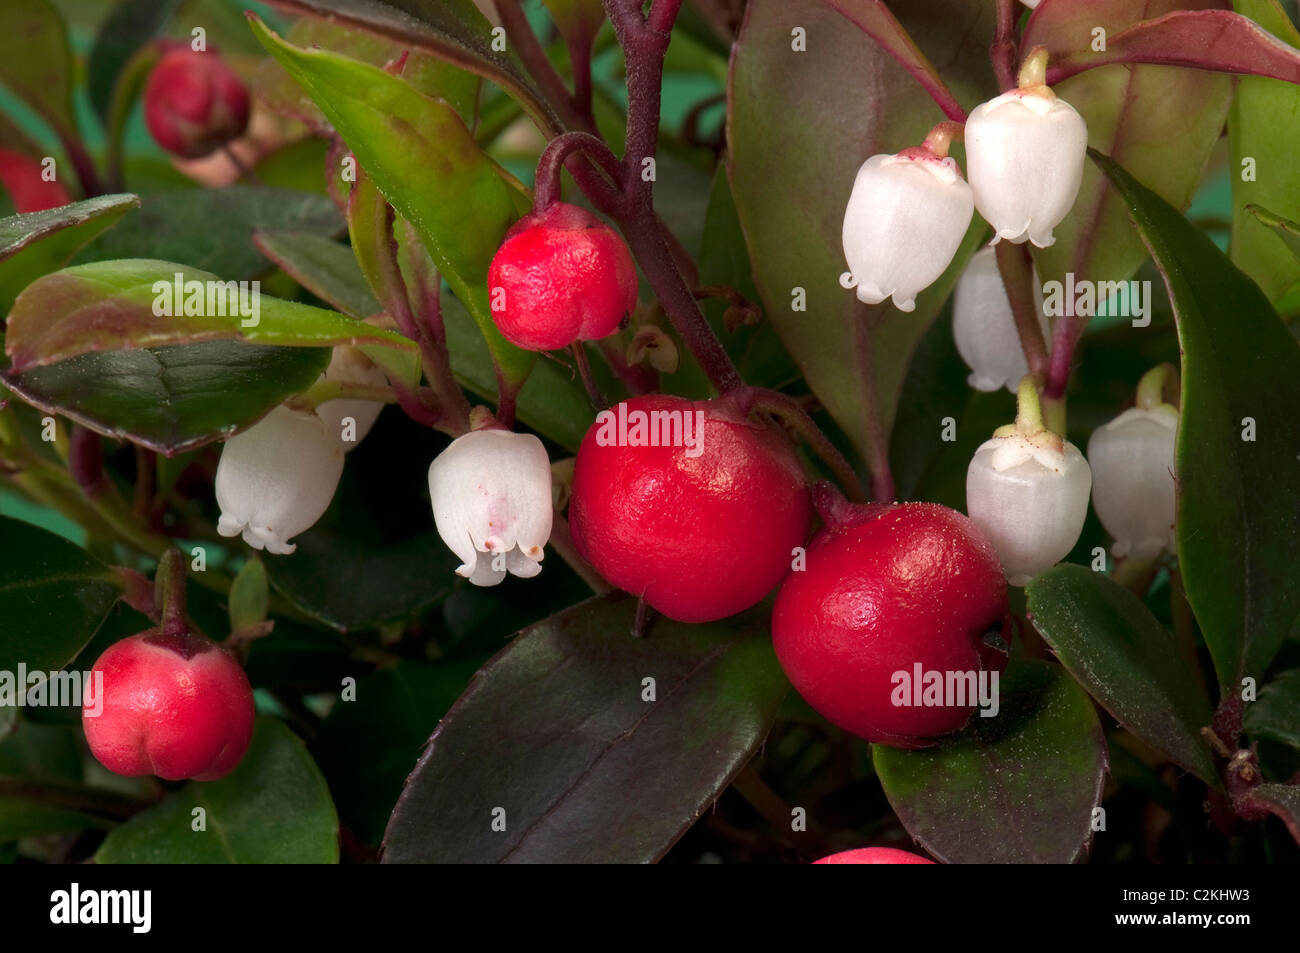 Eastern Teaberry, American Wintergreen (Gaultheria procumbens). Plant with fruit and flowers. Stock Photo